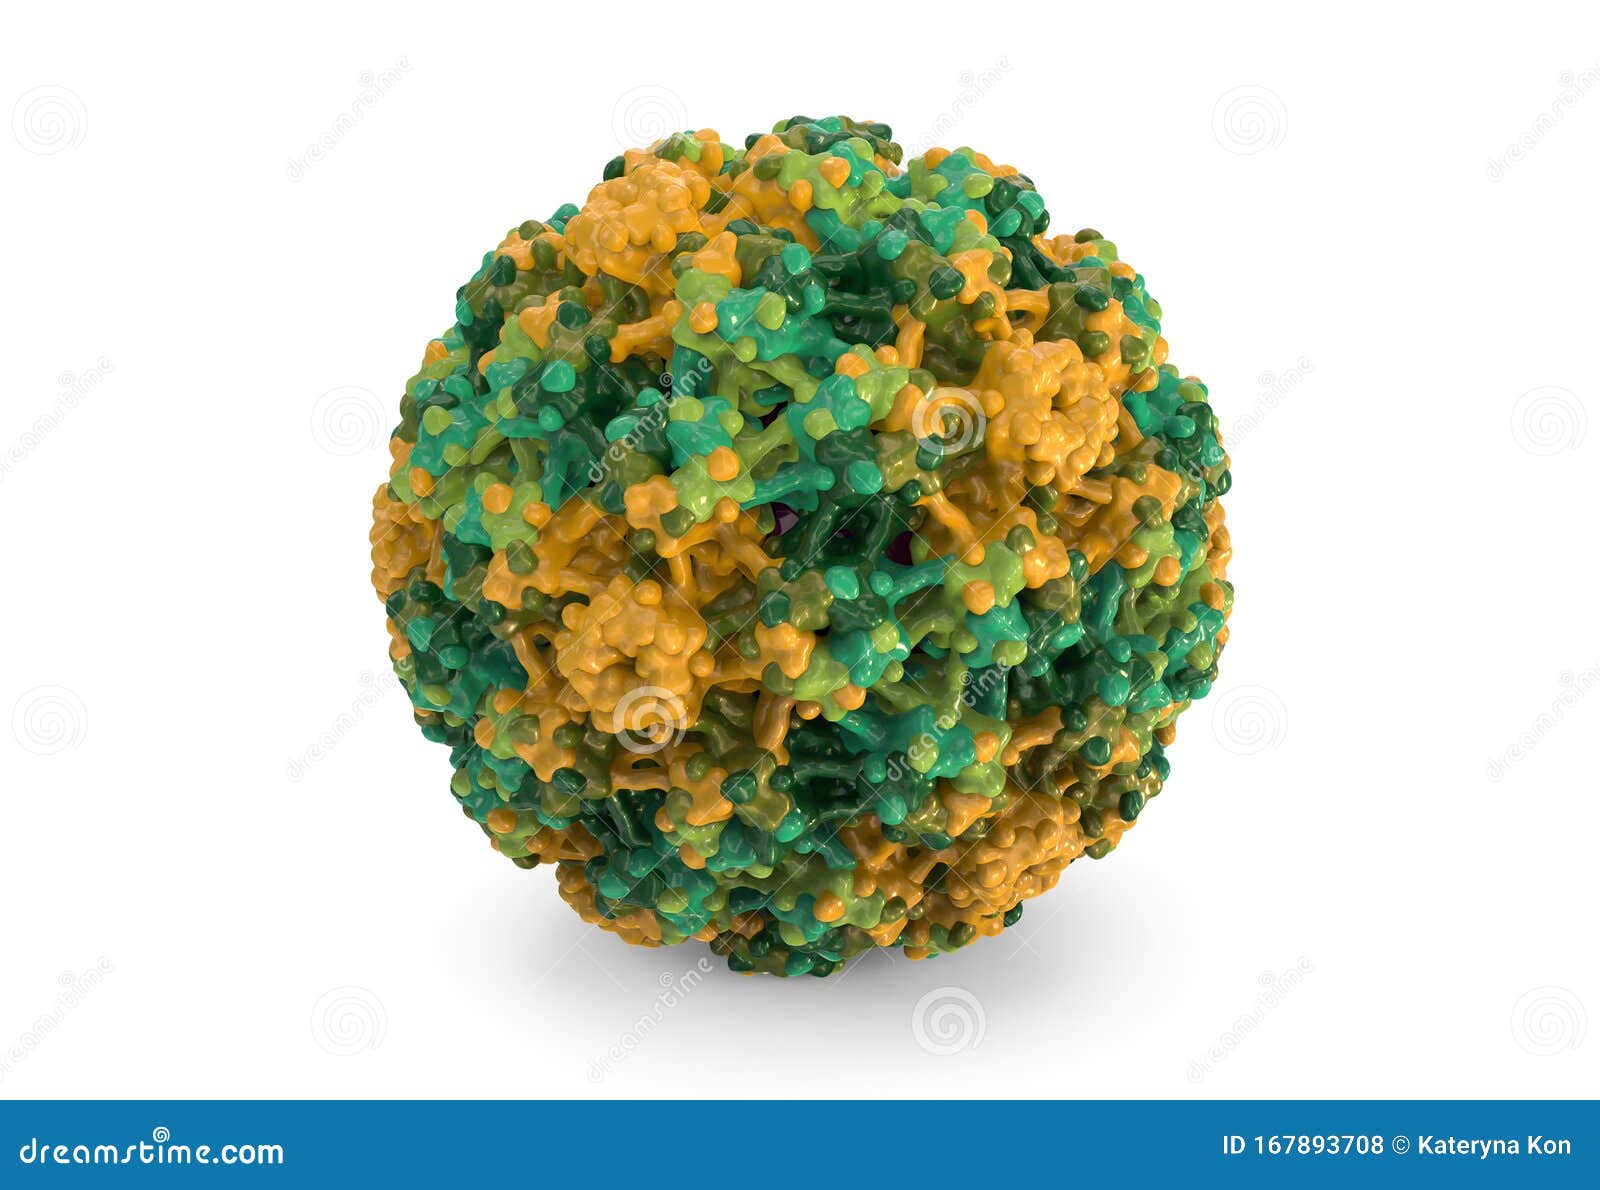 Remove hpv virus. Hpv warts how to remove